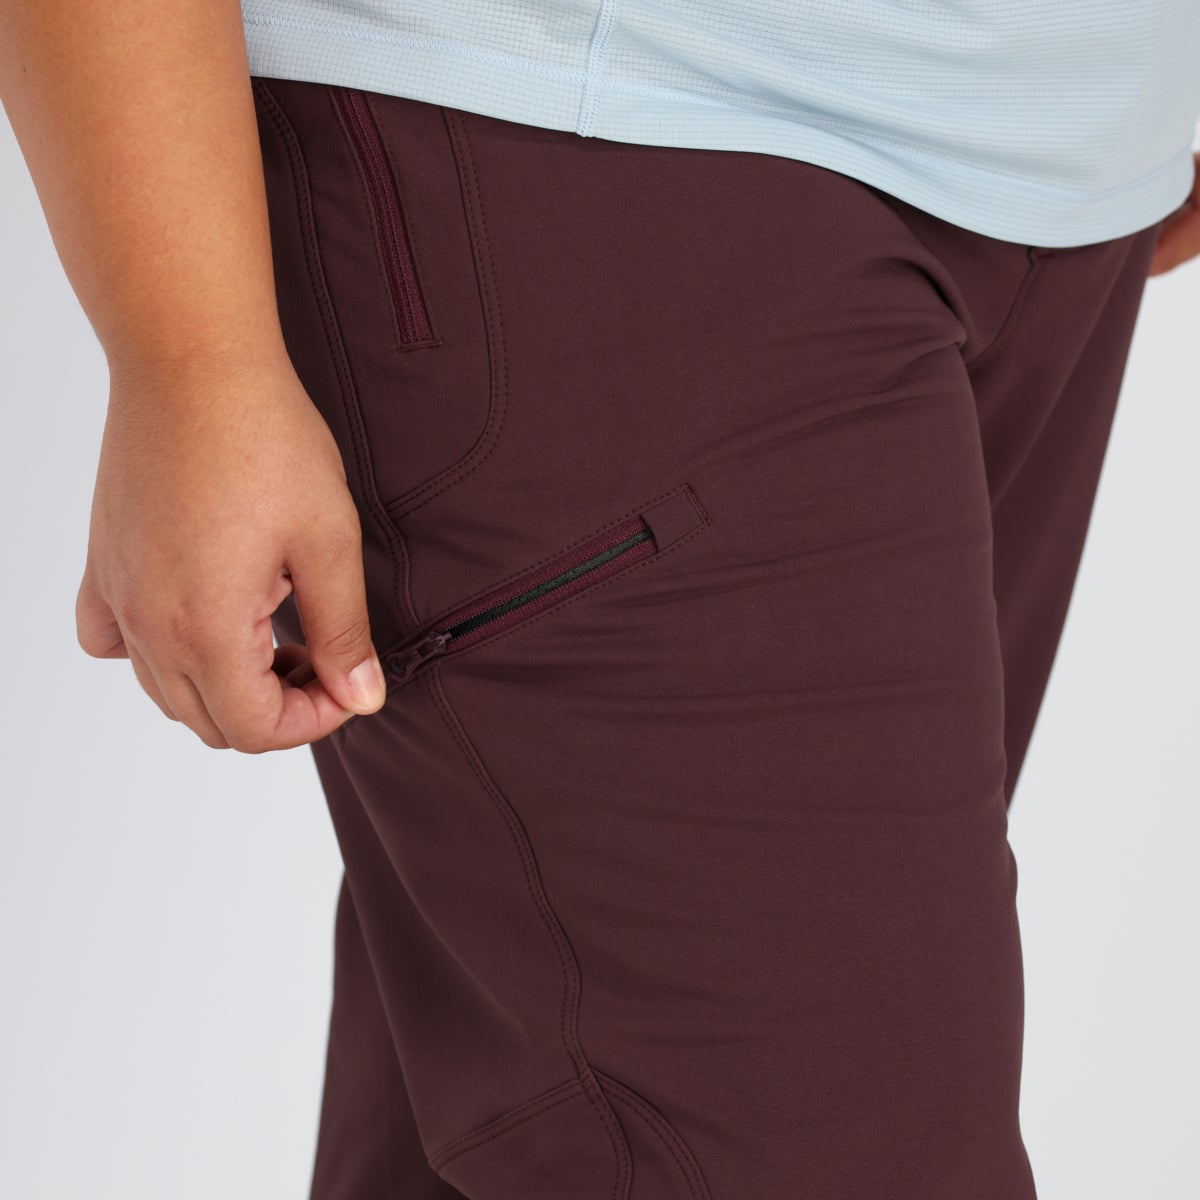 00 :: Front Pocket / Keep your essential items close at hand with this easily-accessible pocket.